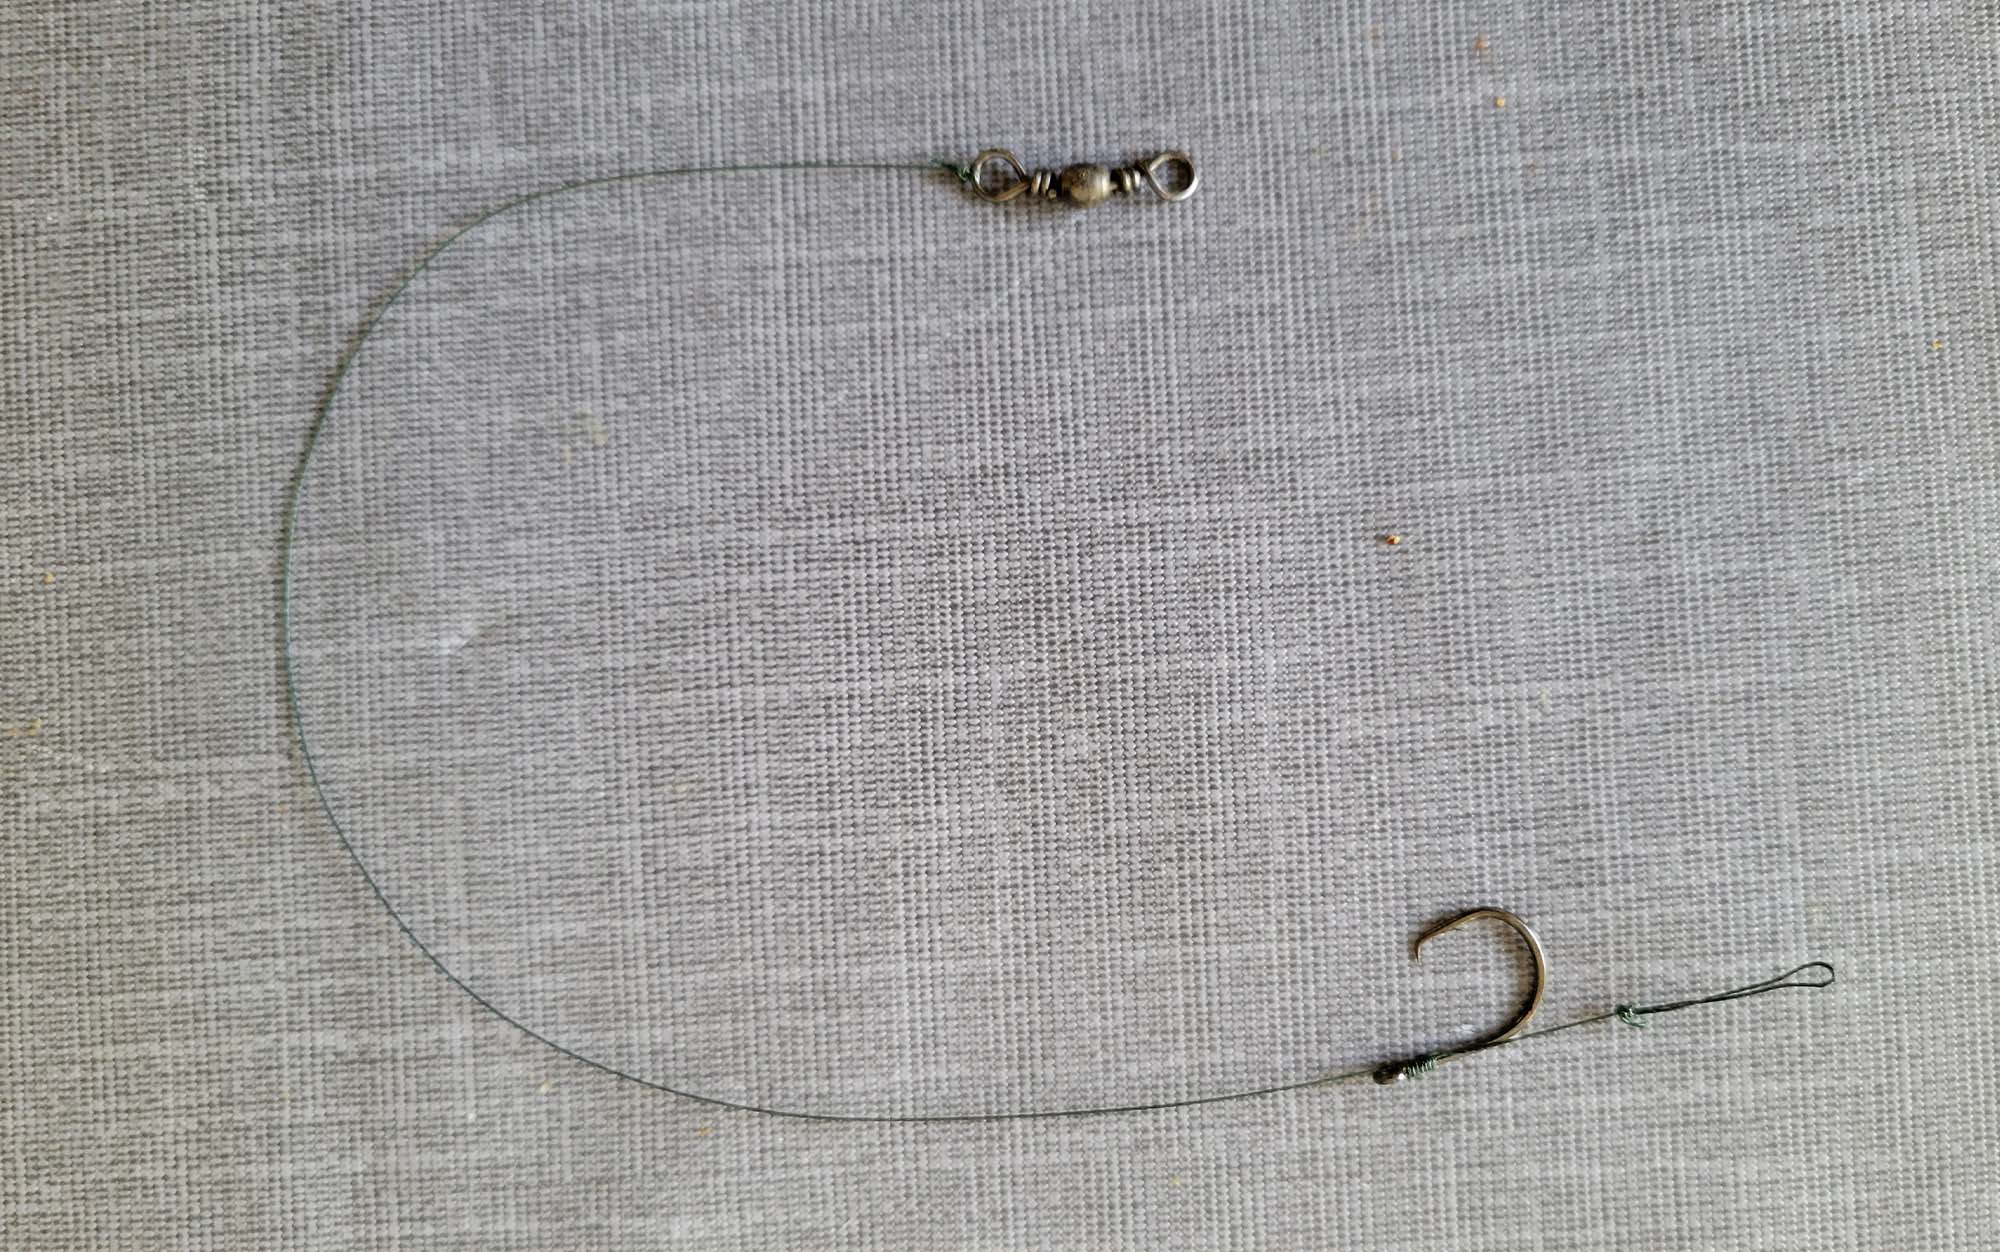 The hair rig is critical to fooling them long enough for the hook to find purchase in the fish’s rubbery mouth.